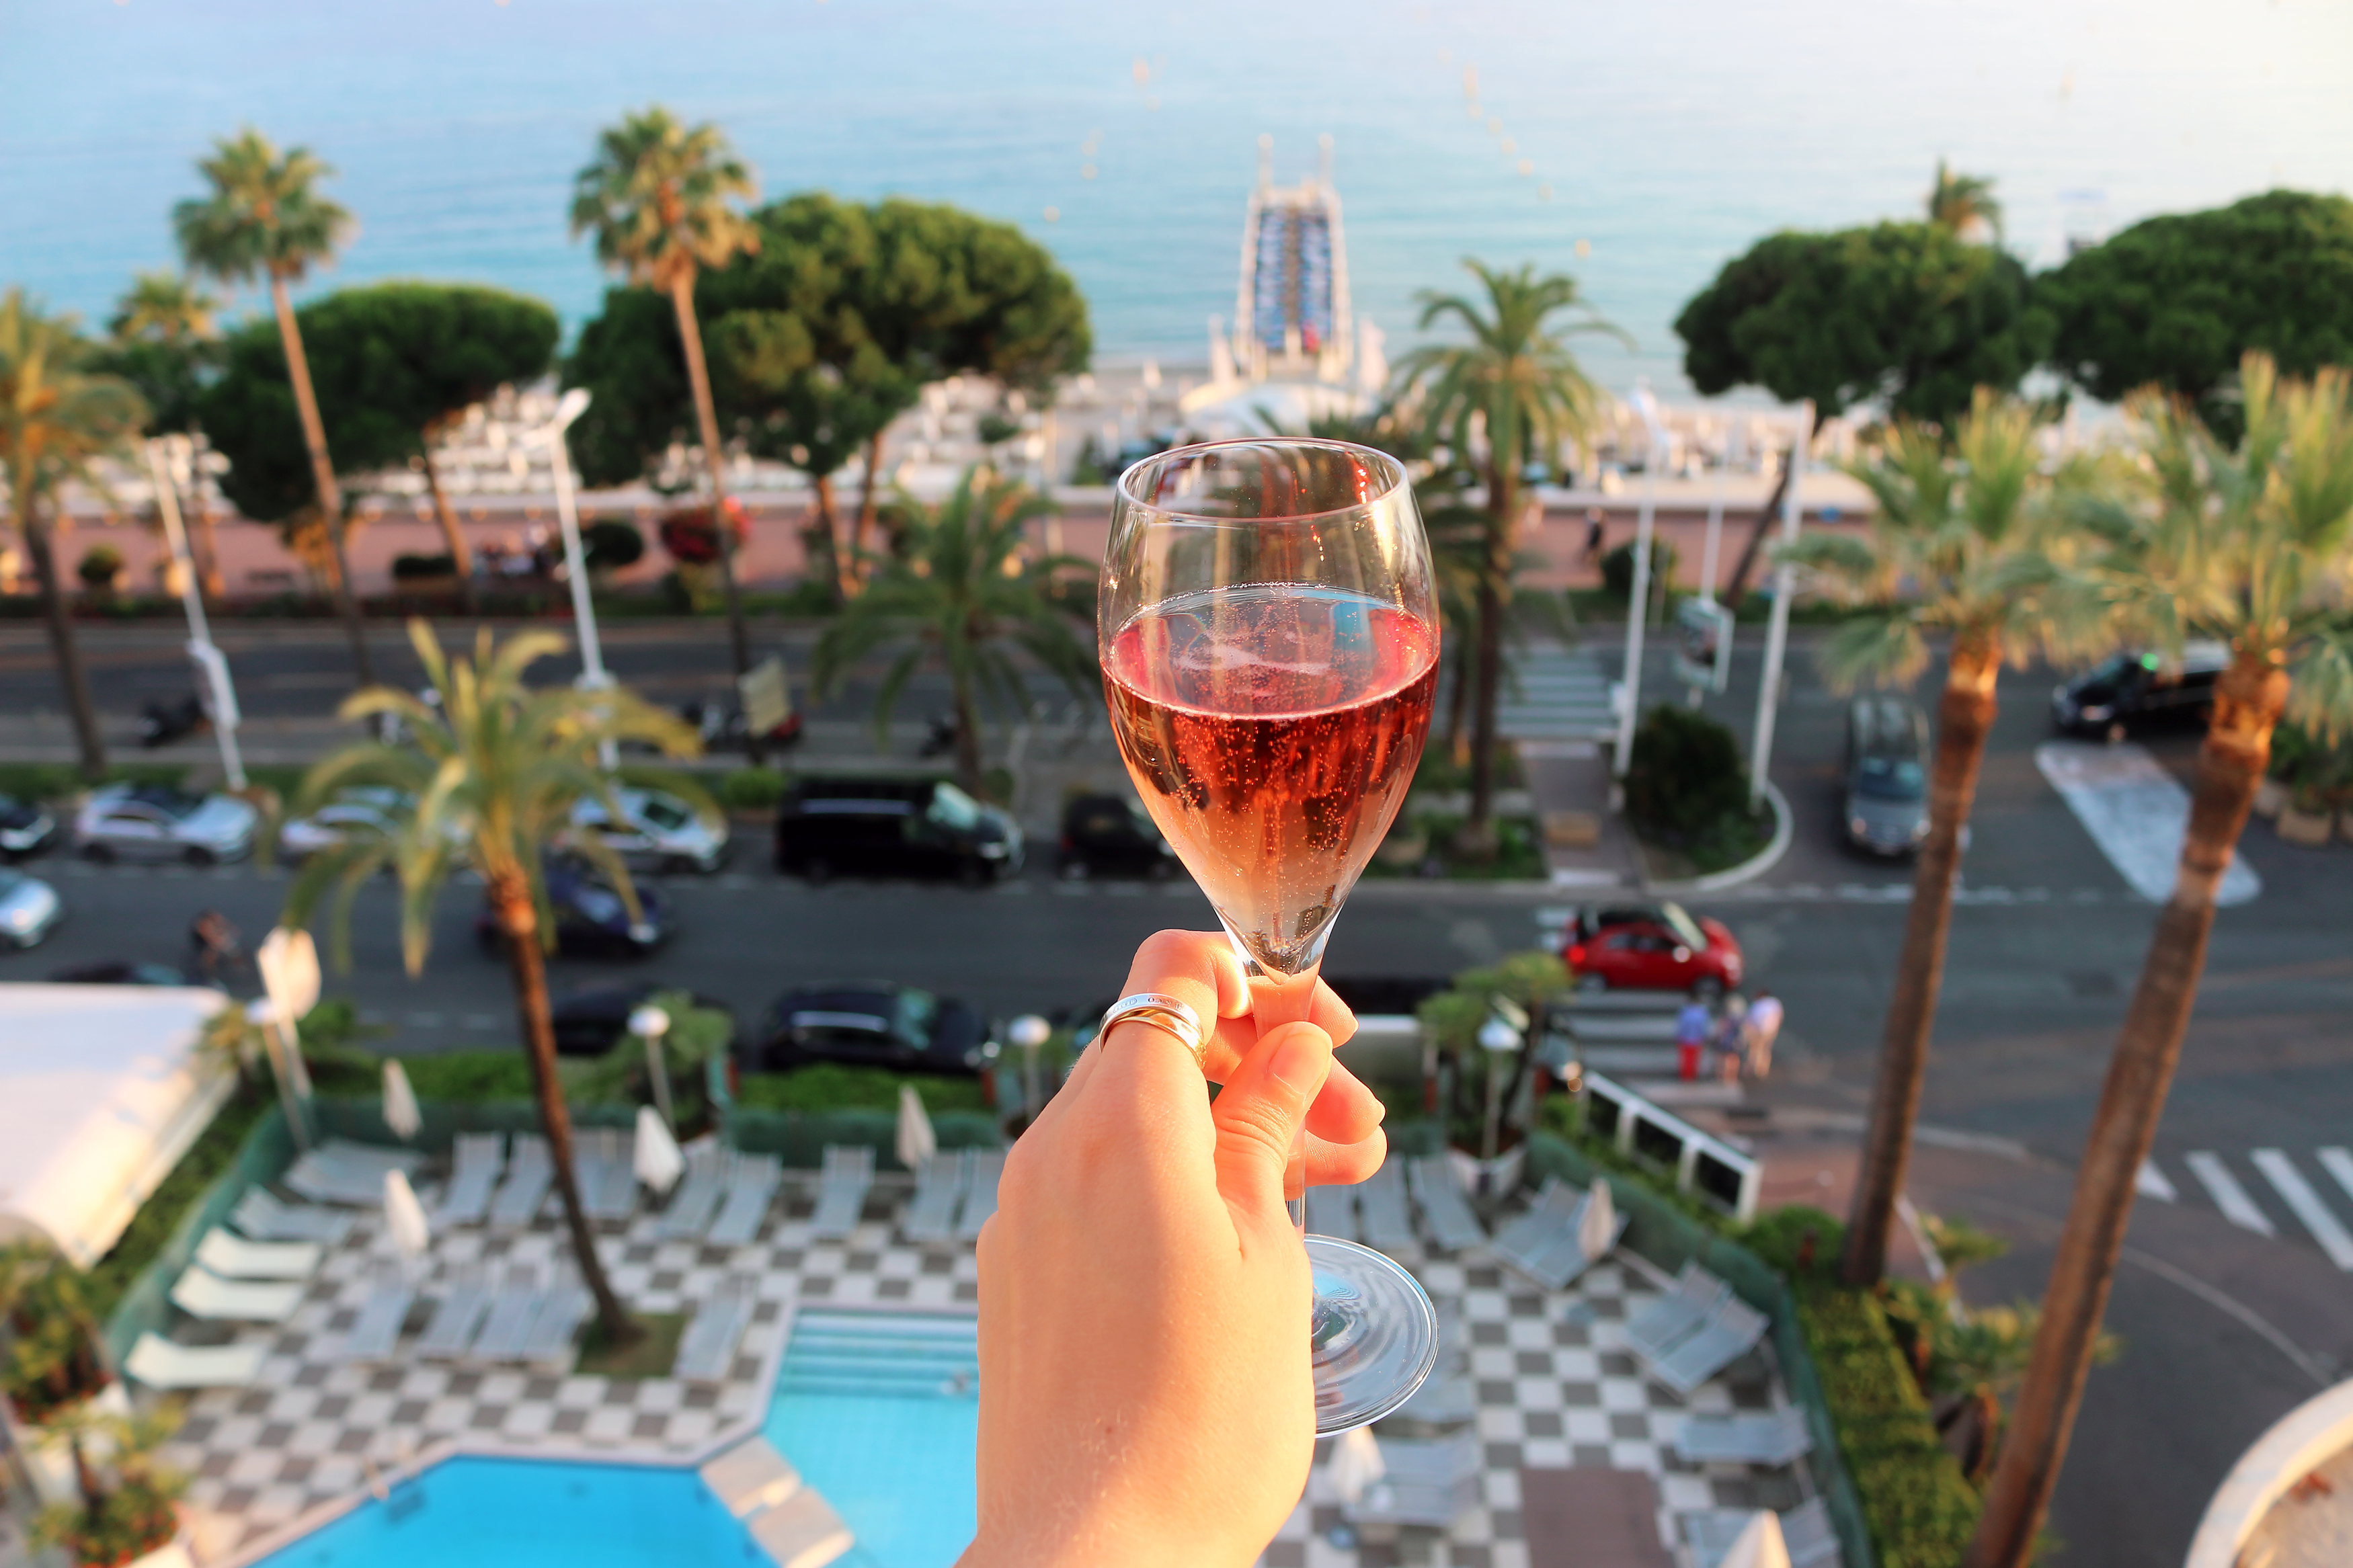 Where to stay in Cannes: Martinez hotel